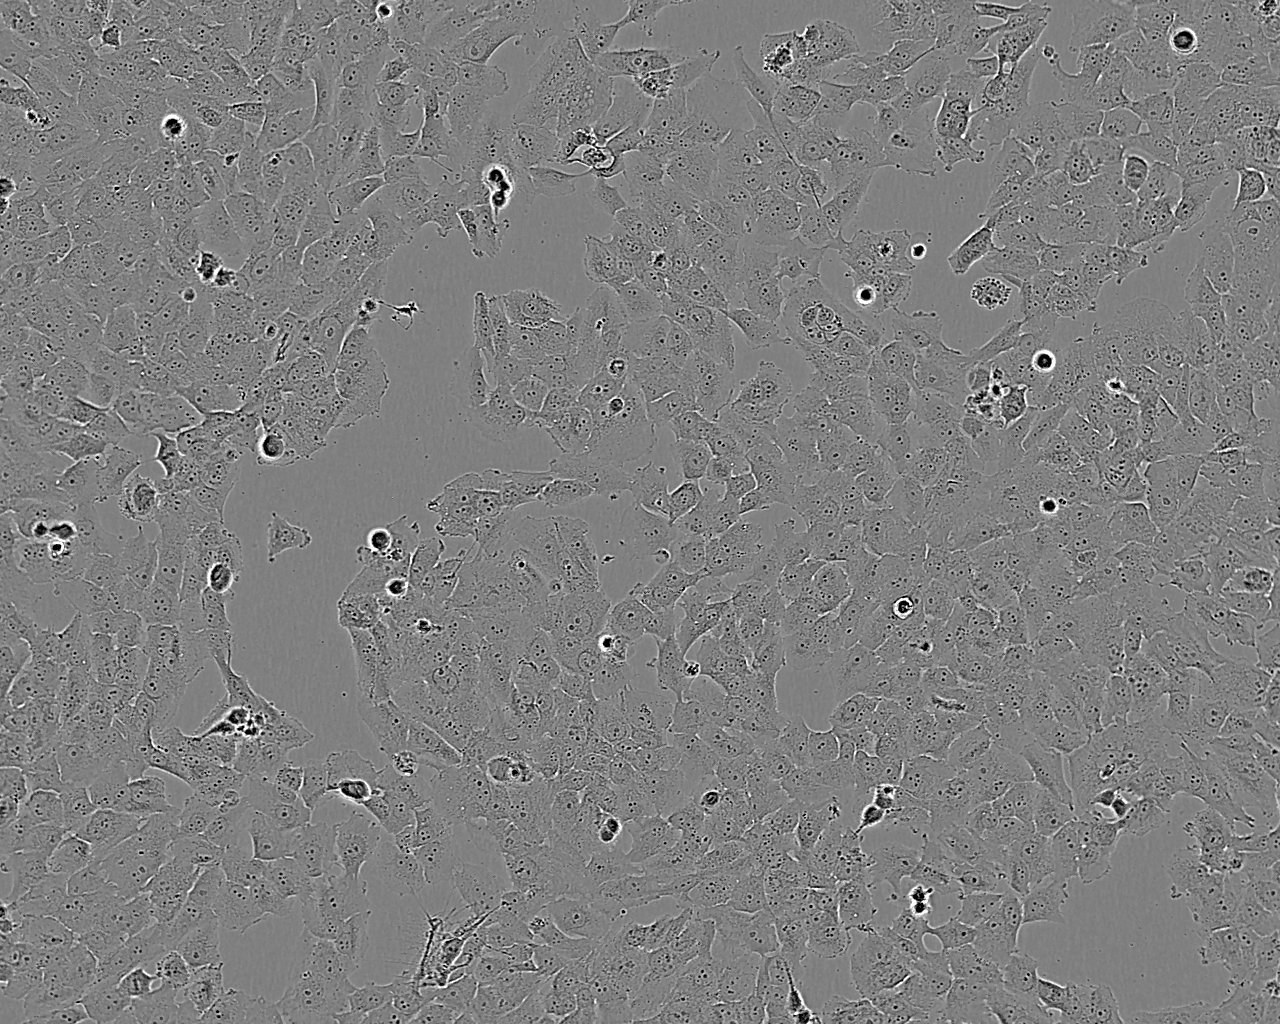 MS1 epithelioid cells小鼠胰岛内皮细胞系